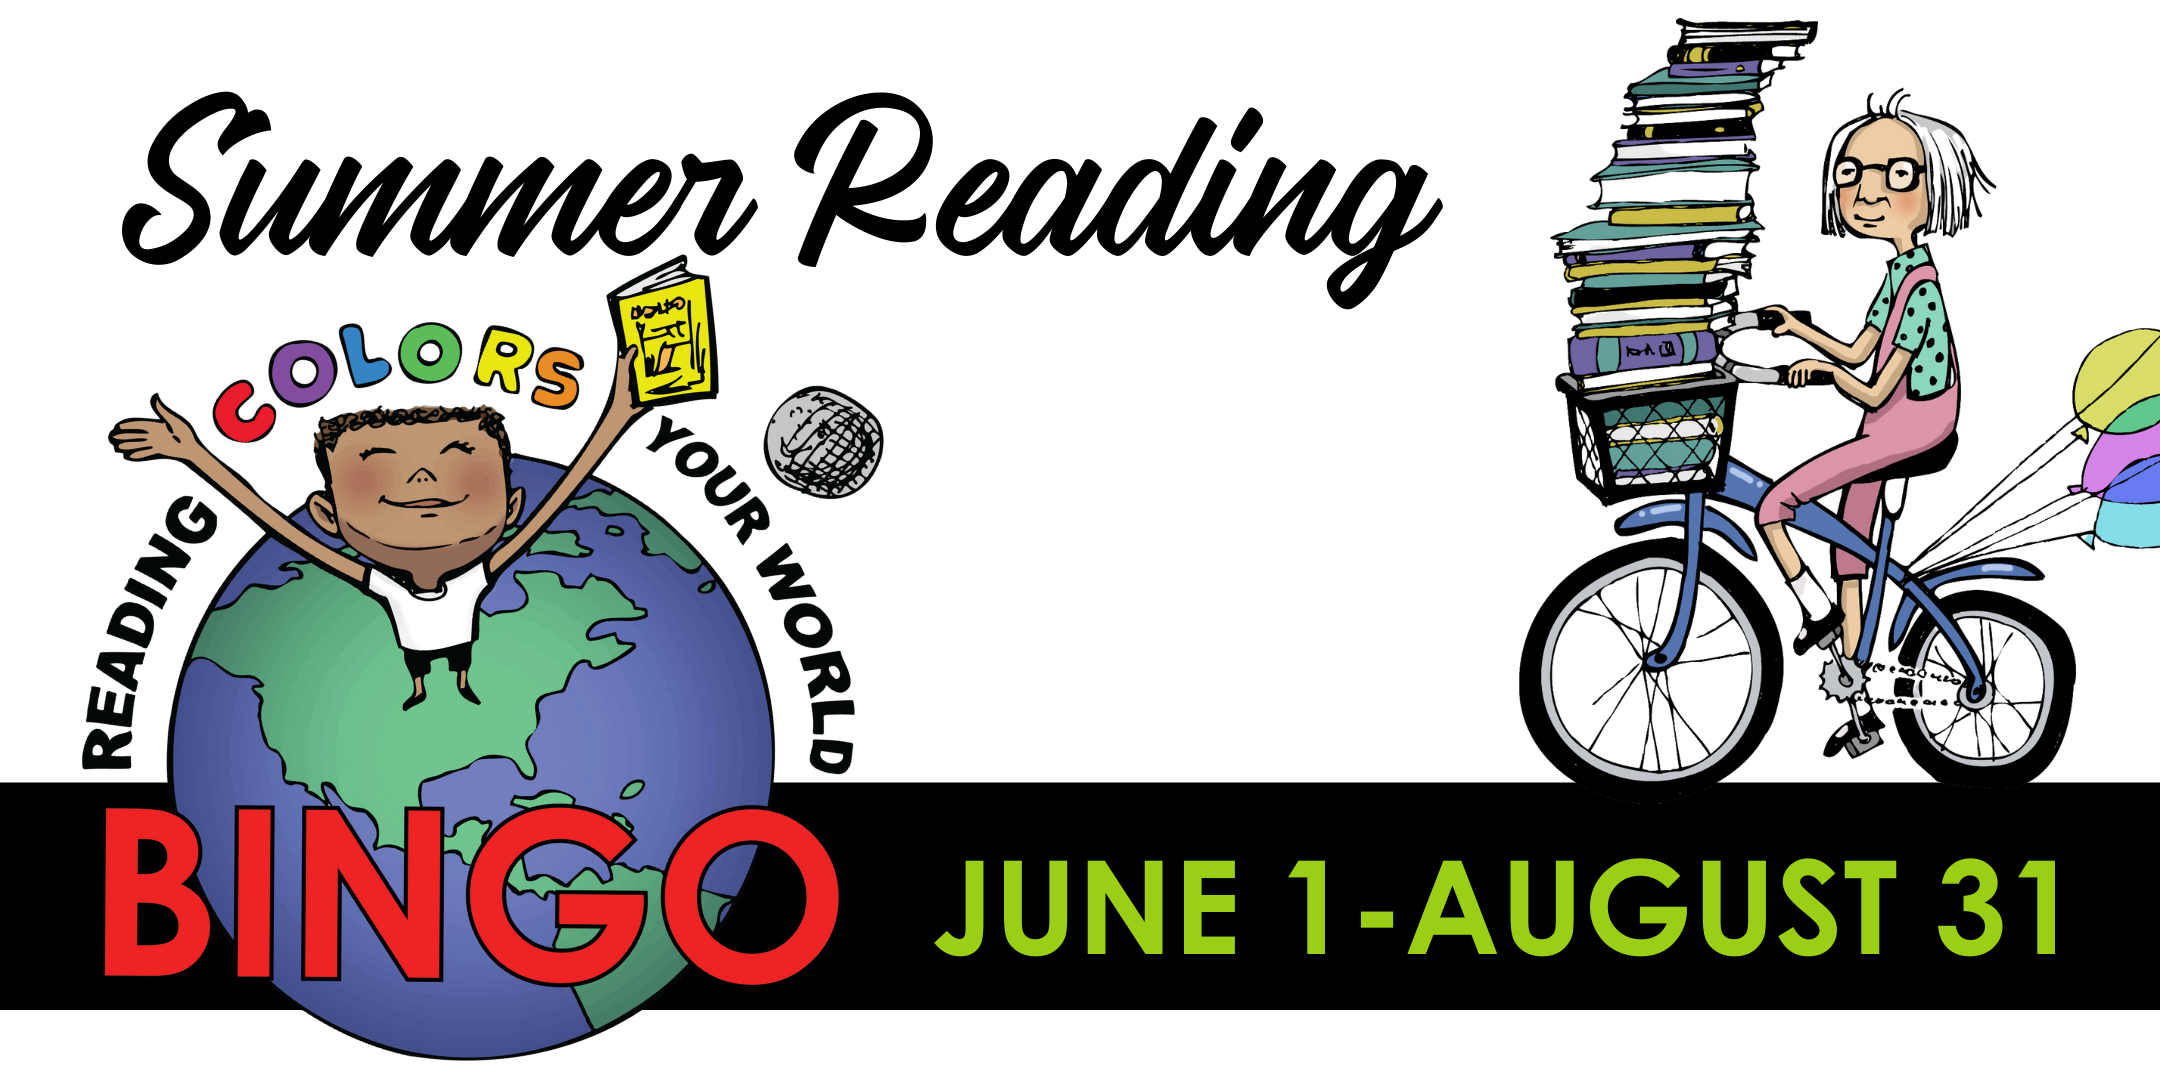 Summer Reading Colors Your World for All Ages: June 1–August 31